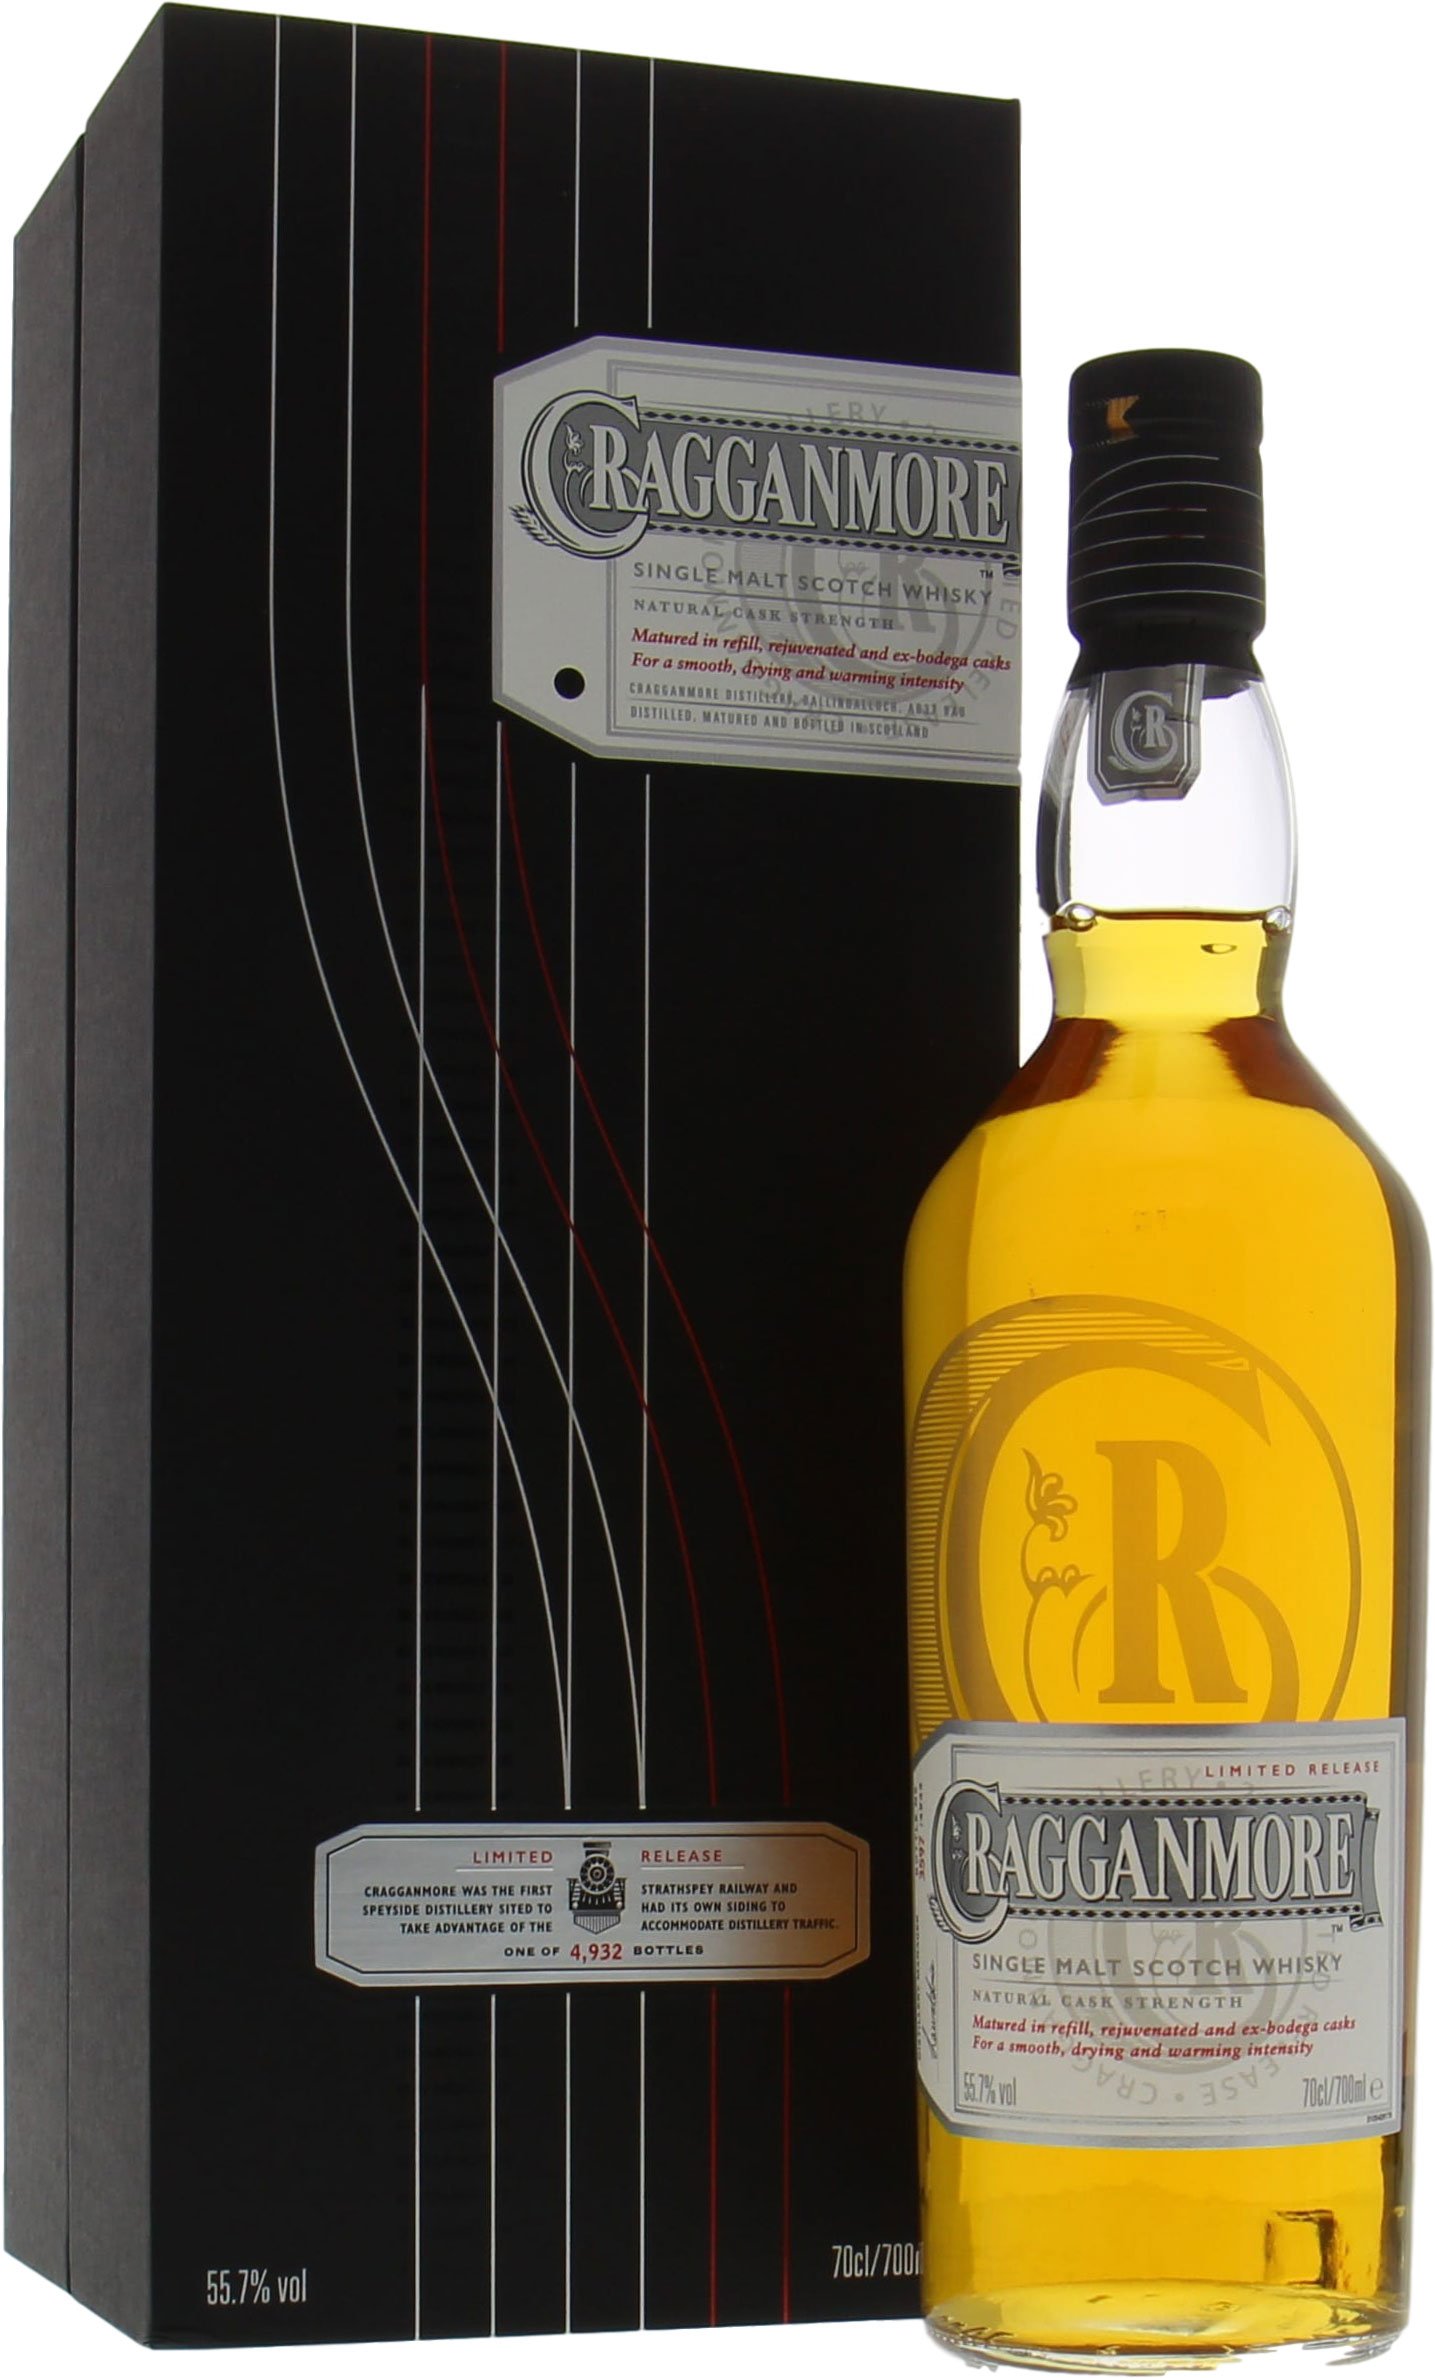 Cragganmore - Limited Release 2016 55.7% nv In Original Container